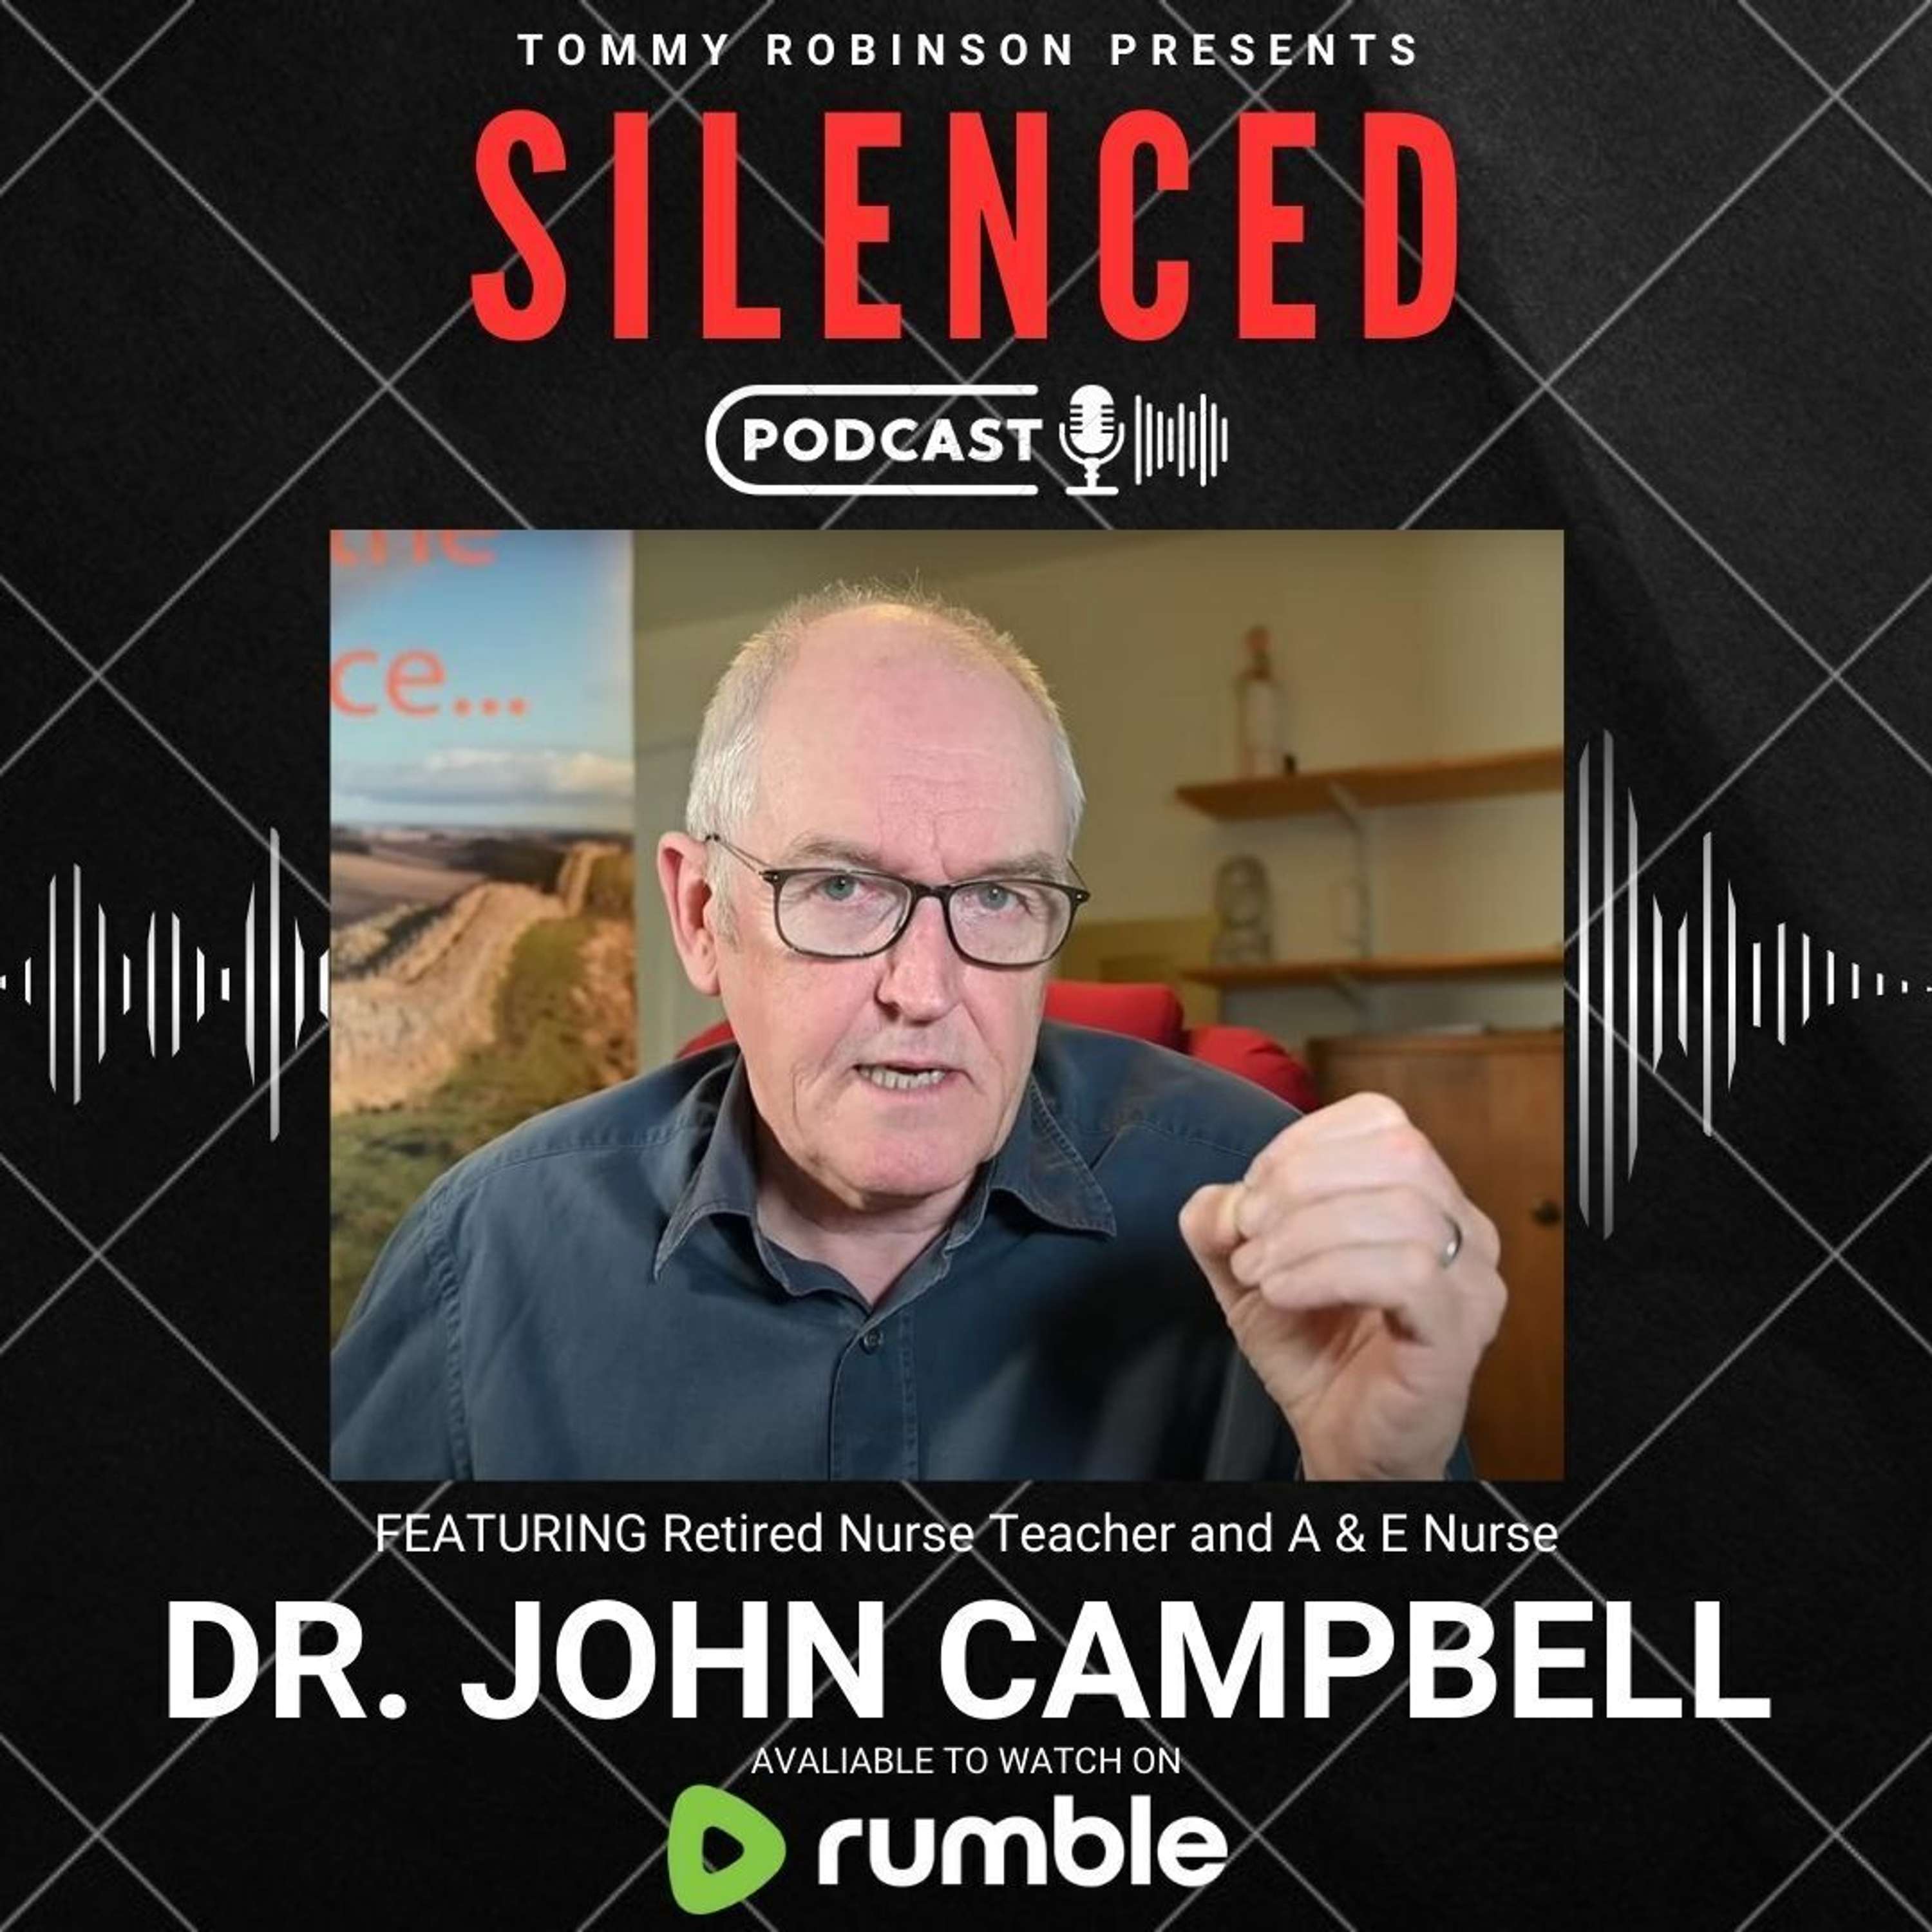 Episode 10 Silenced with Tommy Robinson - Dr John Campbell